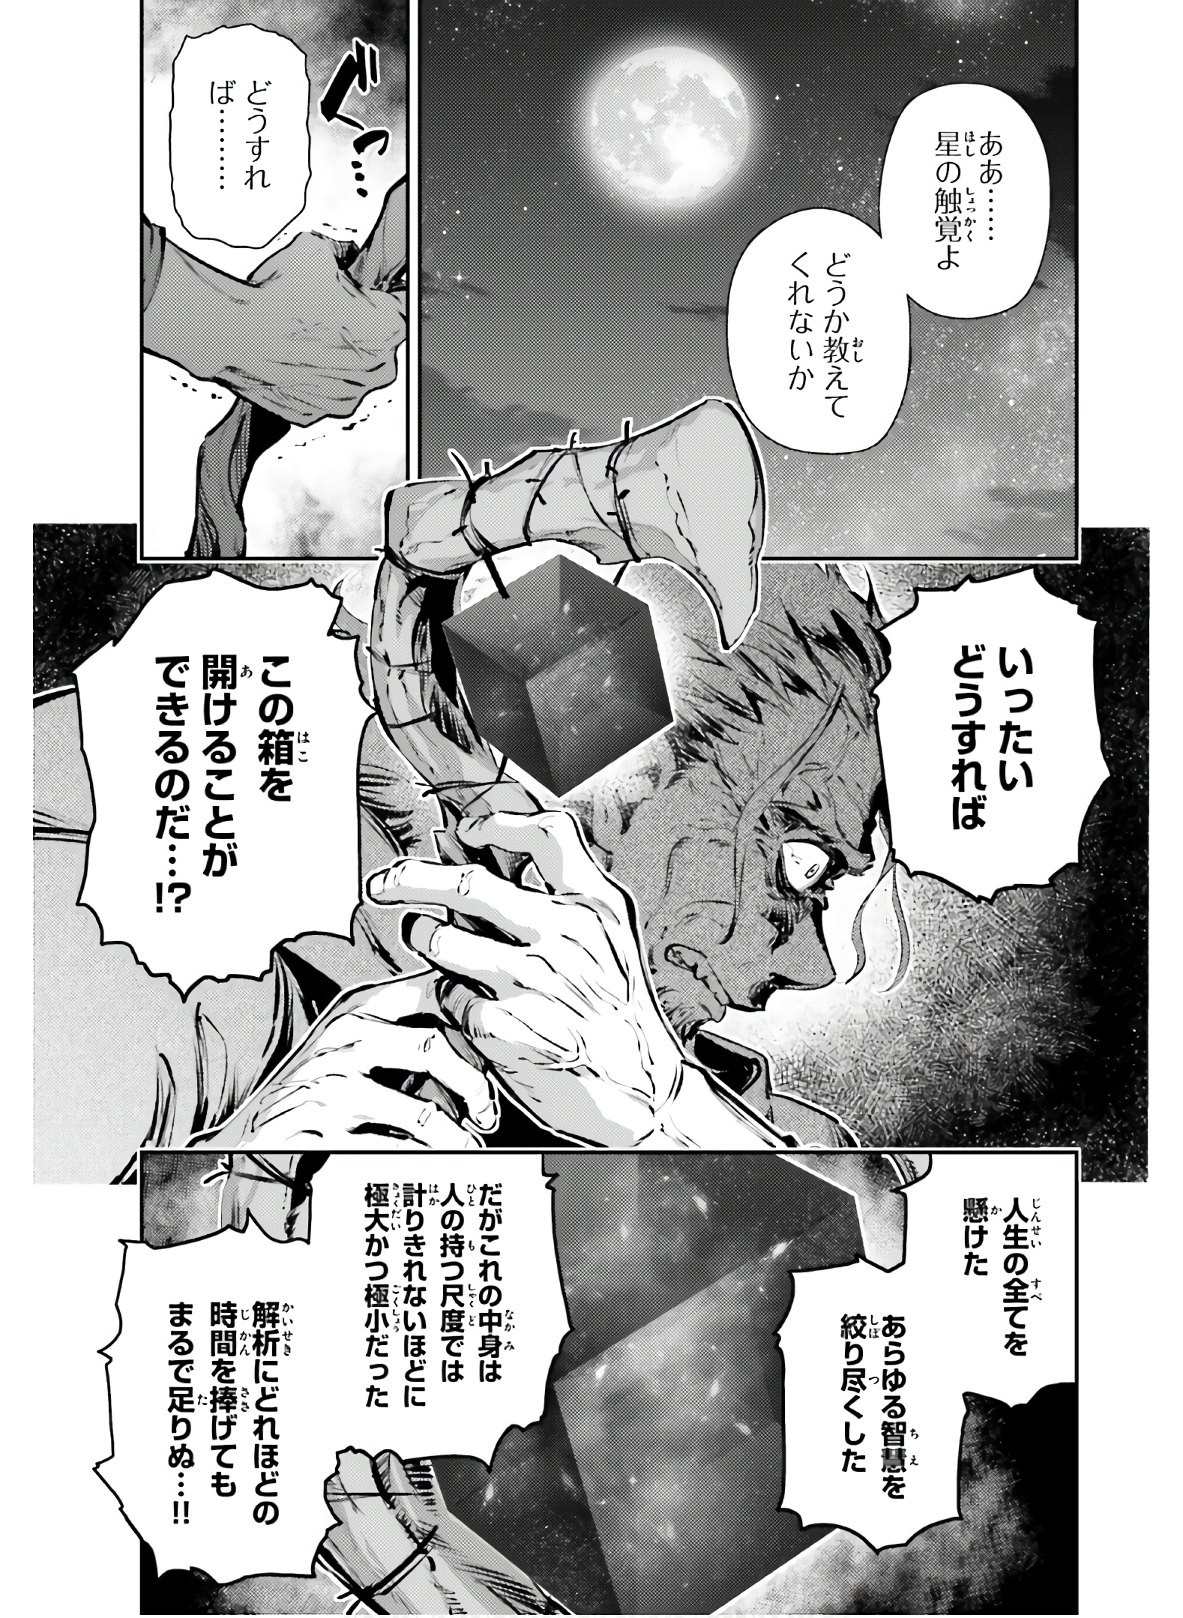 Fate/Kaleid Liner Prisma Illya Drei! - Chapter 65-1 - Page 3